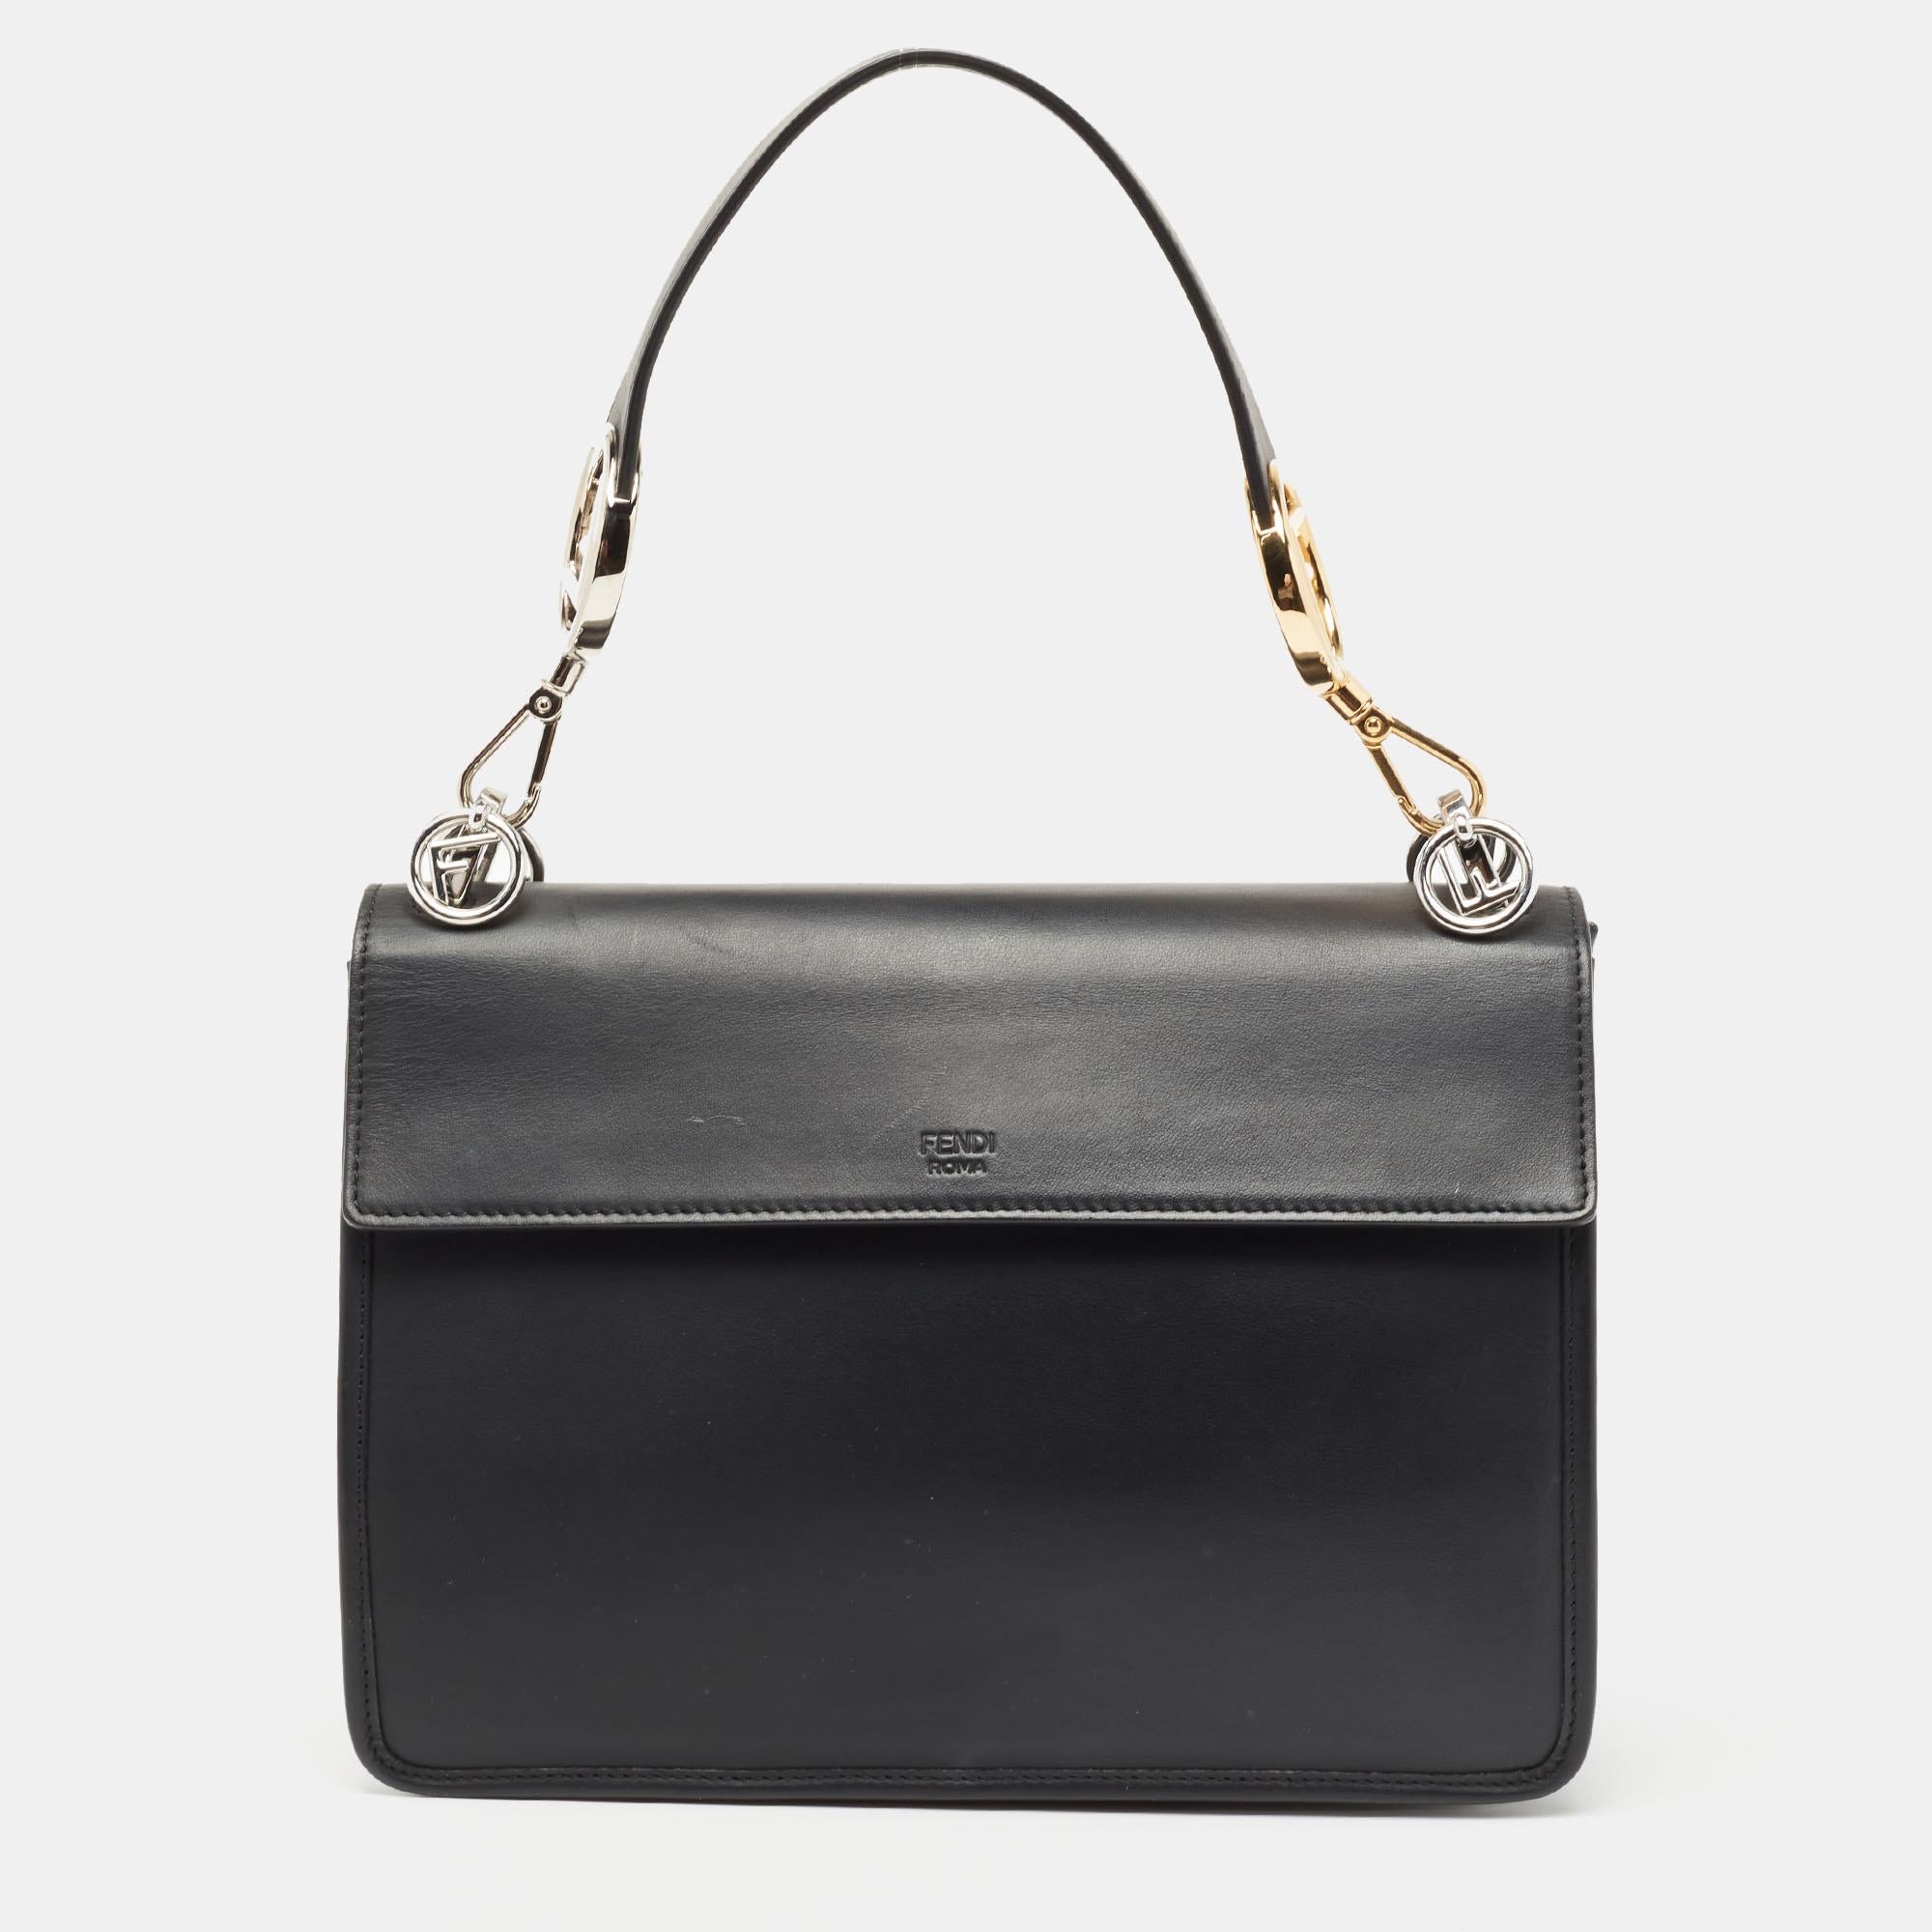 This stunning Kan I bag by Fendi has been crafted to instantly elevate your look. Made of leather in black, this bag has a luxe exterior with the F logo in silver-tone metal on the flap. It can be paraded using the dual carrying options.

Includes: